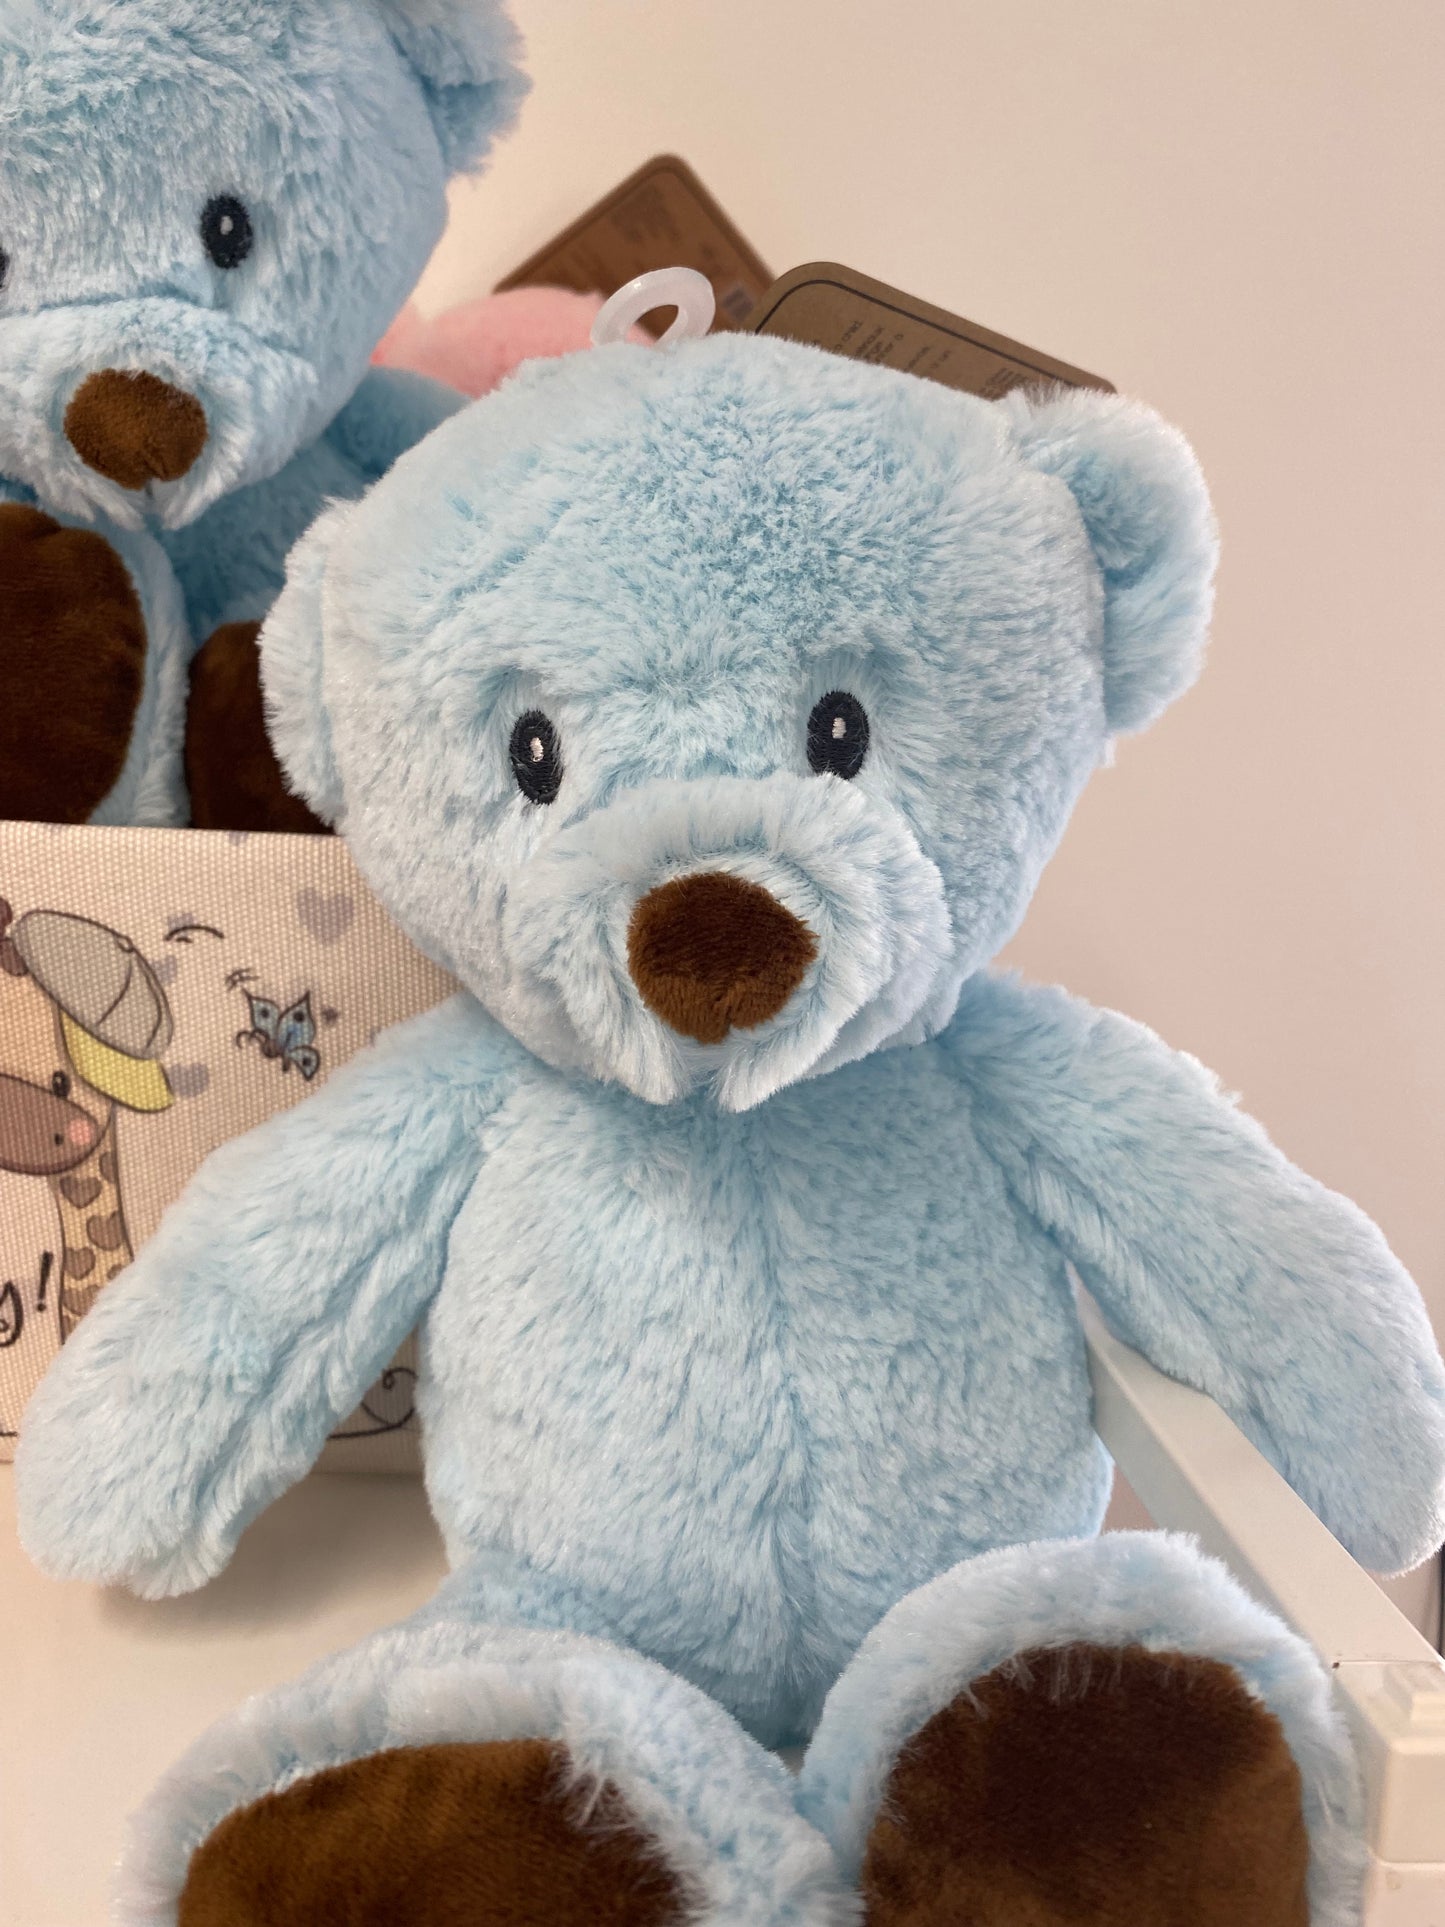 Plush Teddy Bears, Available in Pink and Blue